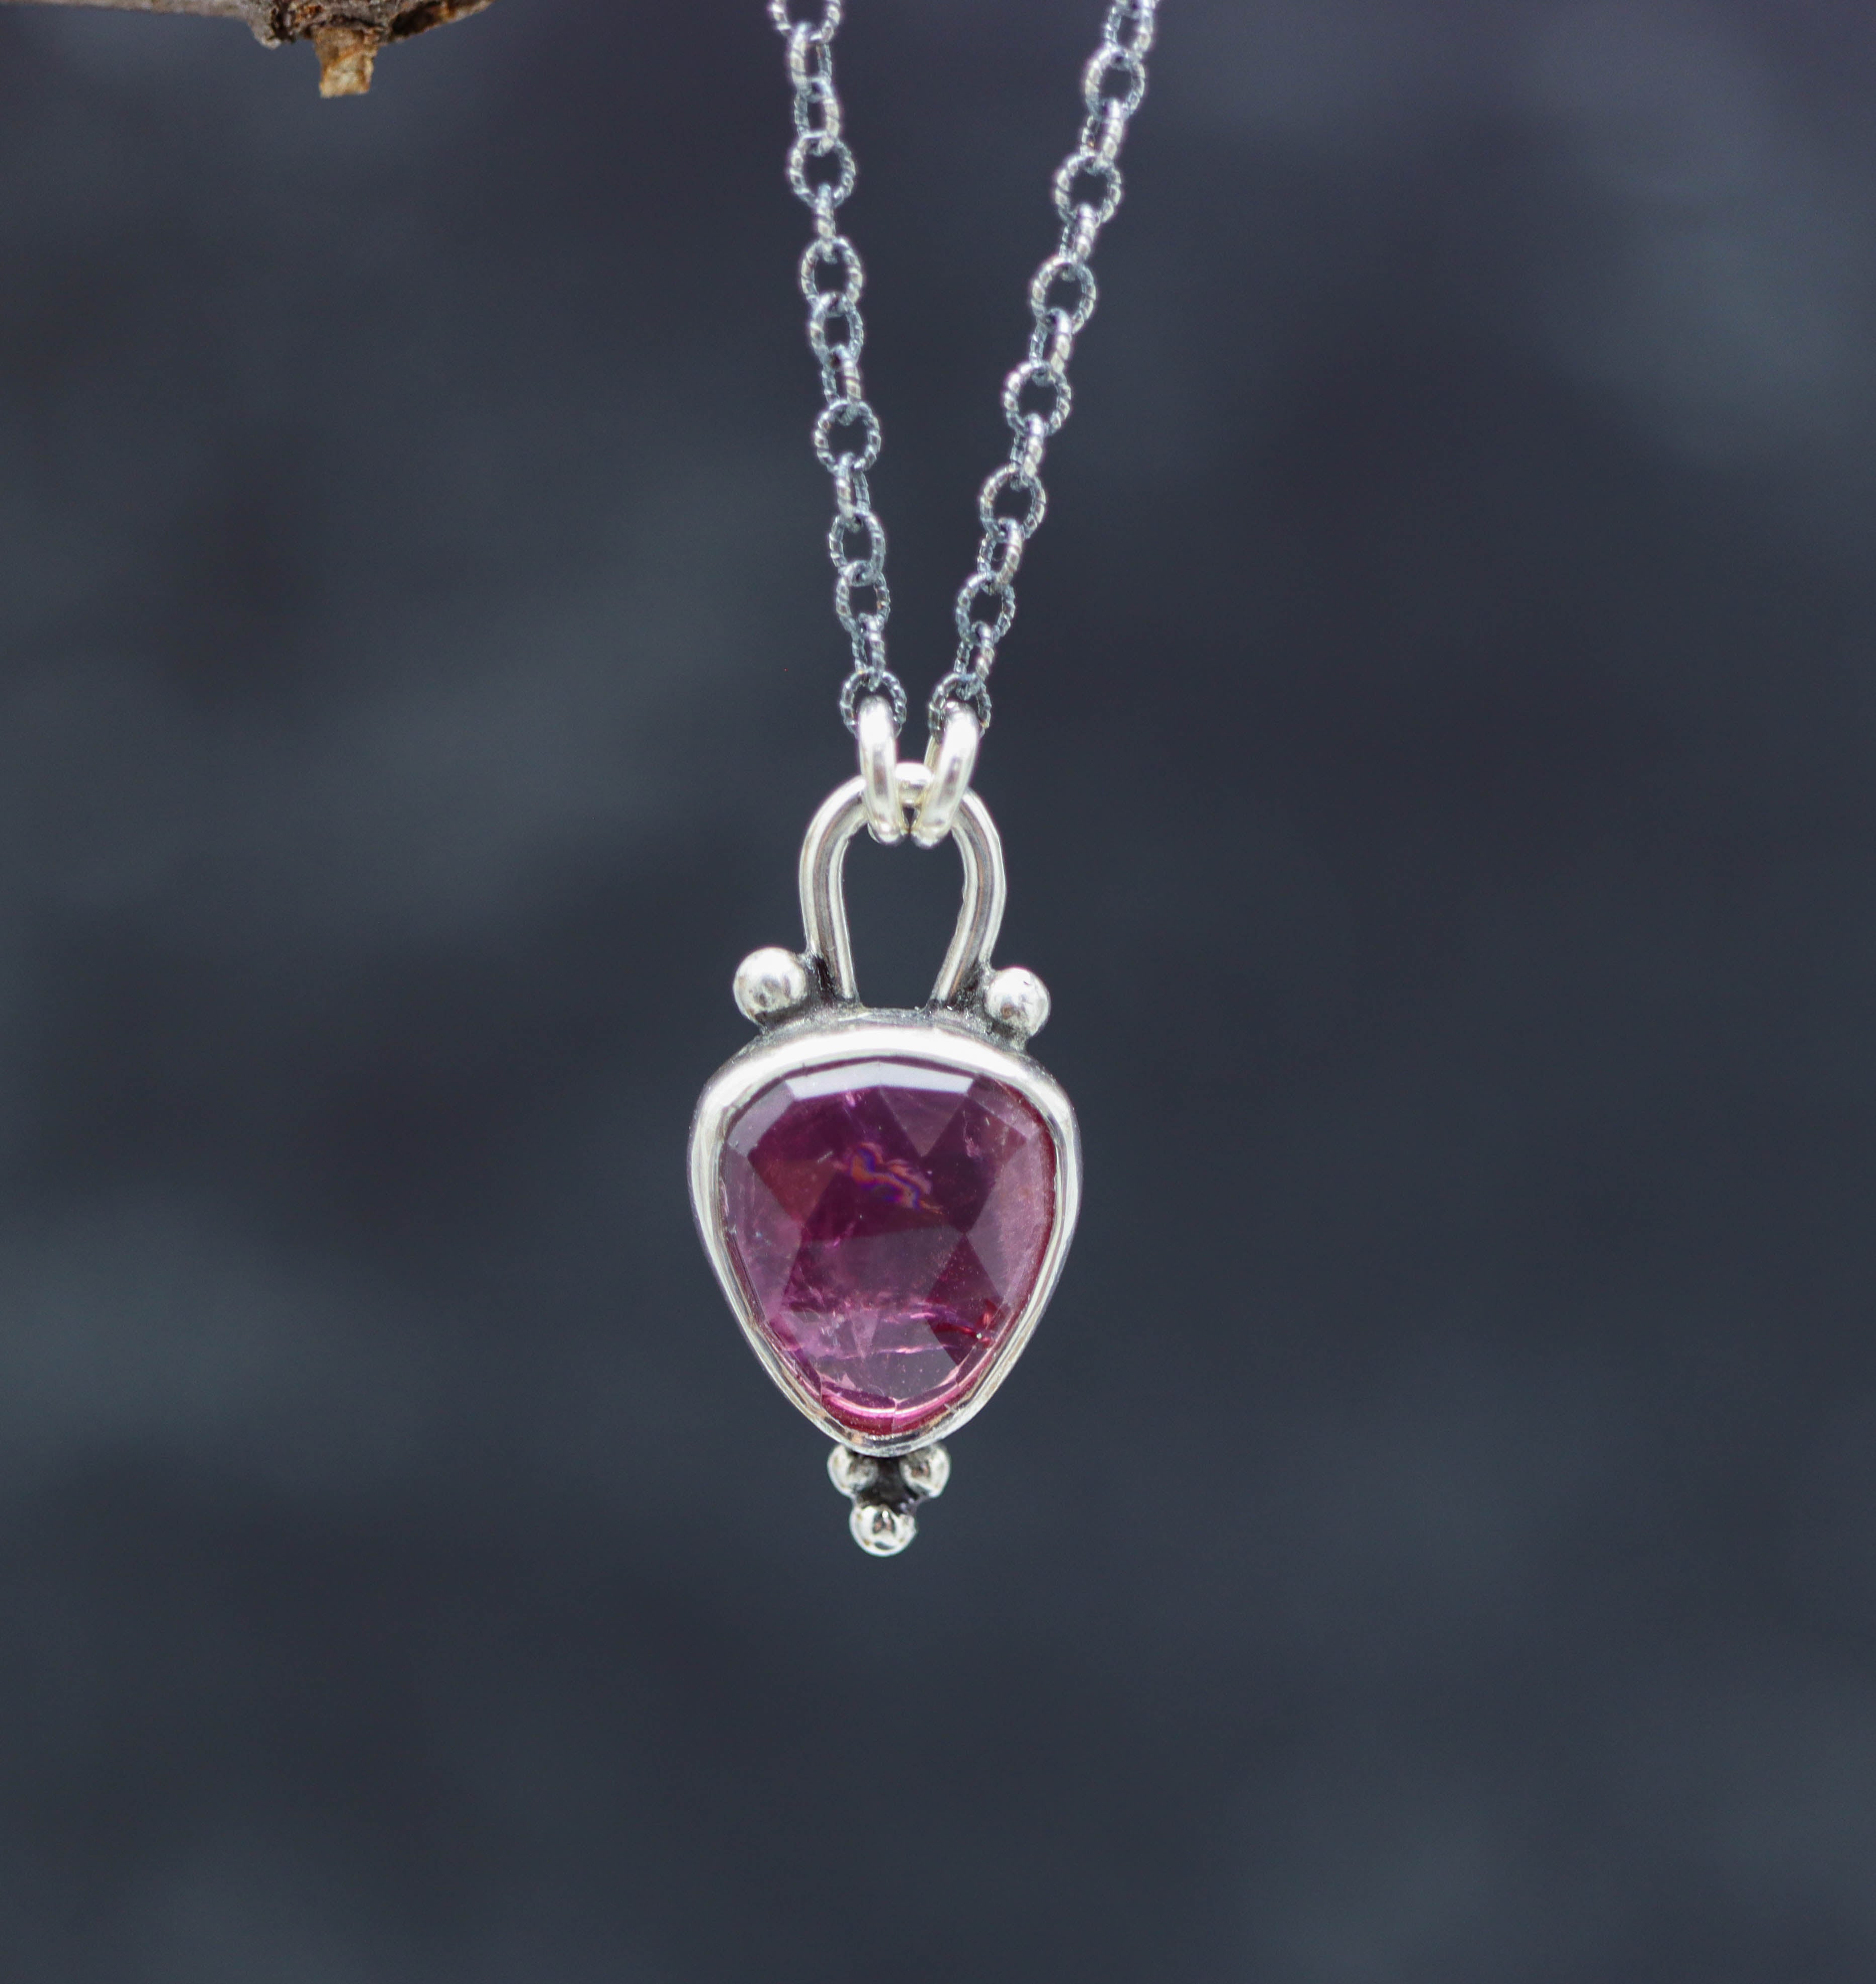 Pink Tourmaline Pendant Necklace Sterling Silver